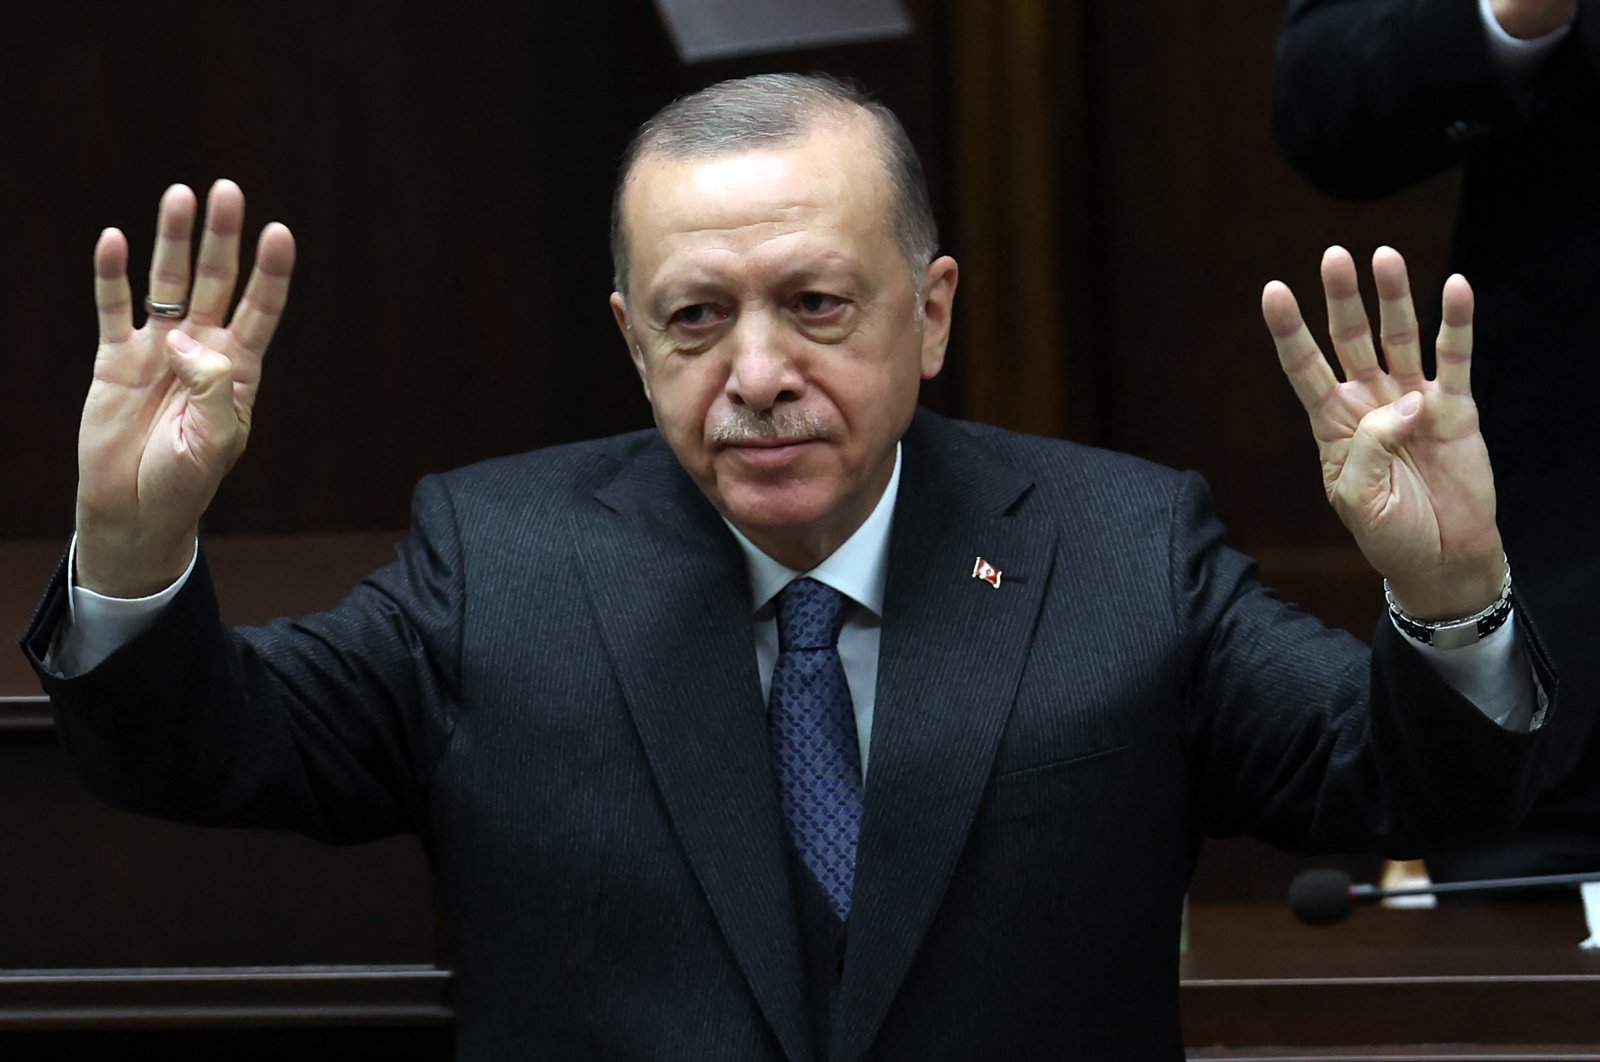 Turkish President Recep Tayyip Erdoğan gestures as he gives a speech during a party parliamentary group meeting at the Grand National Assembly of Turkey in Ankara, Turkey, April 20, 2022. (AFP Photo)